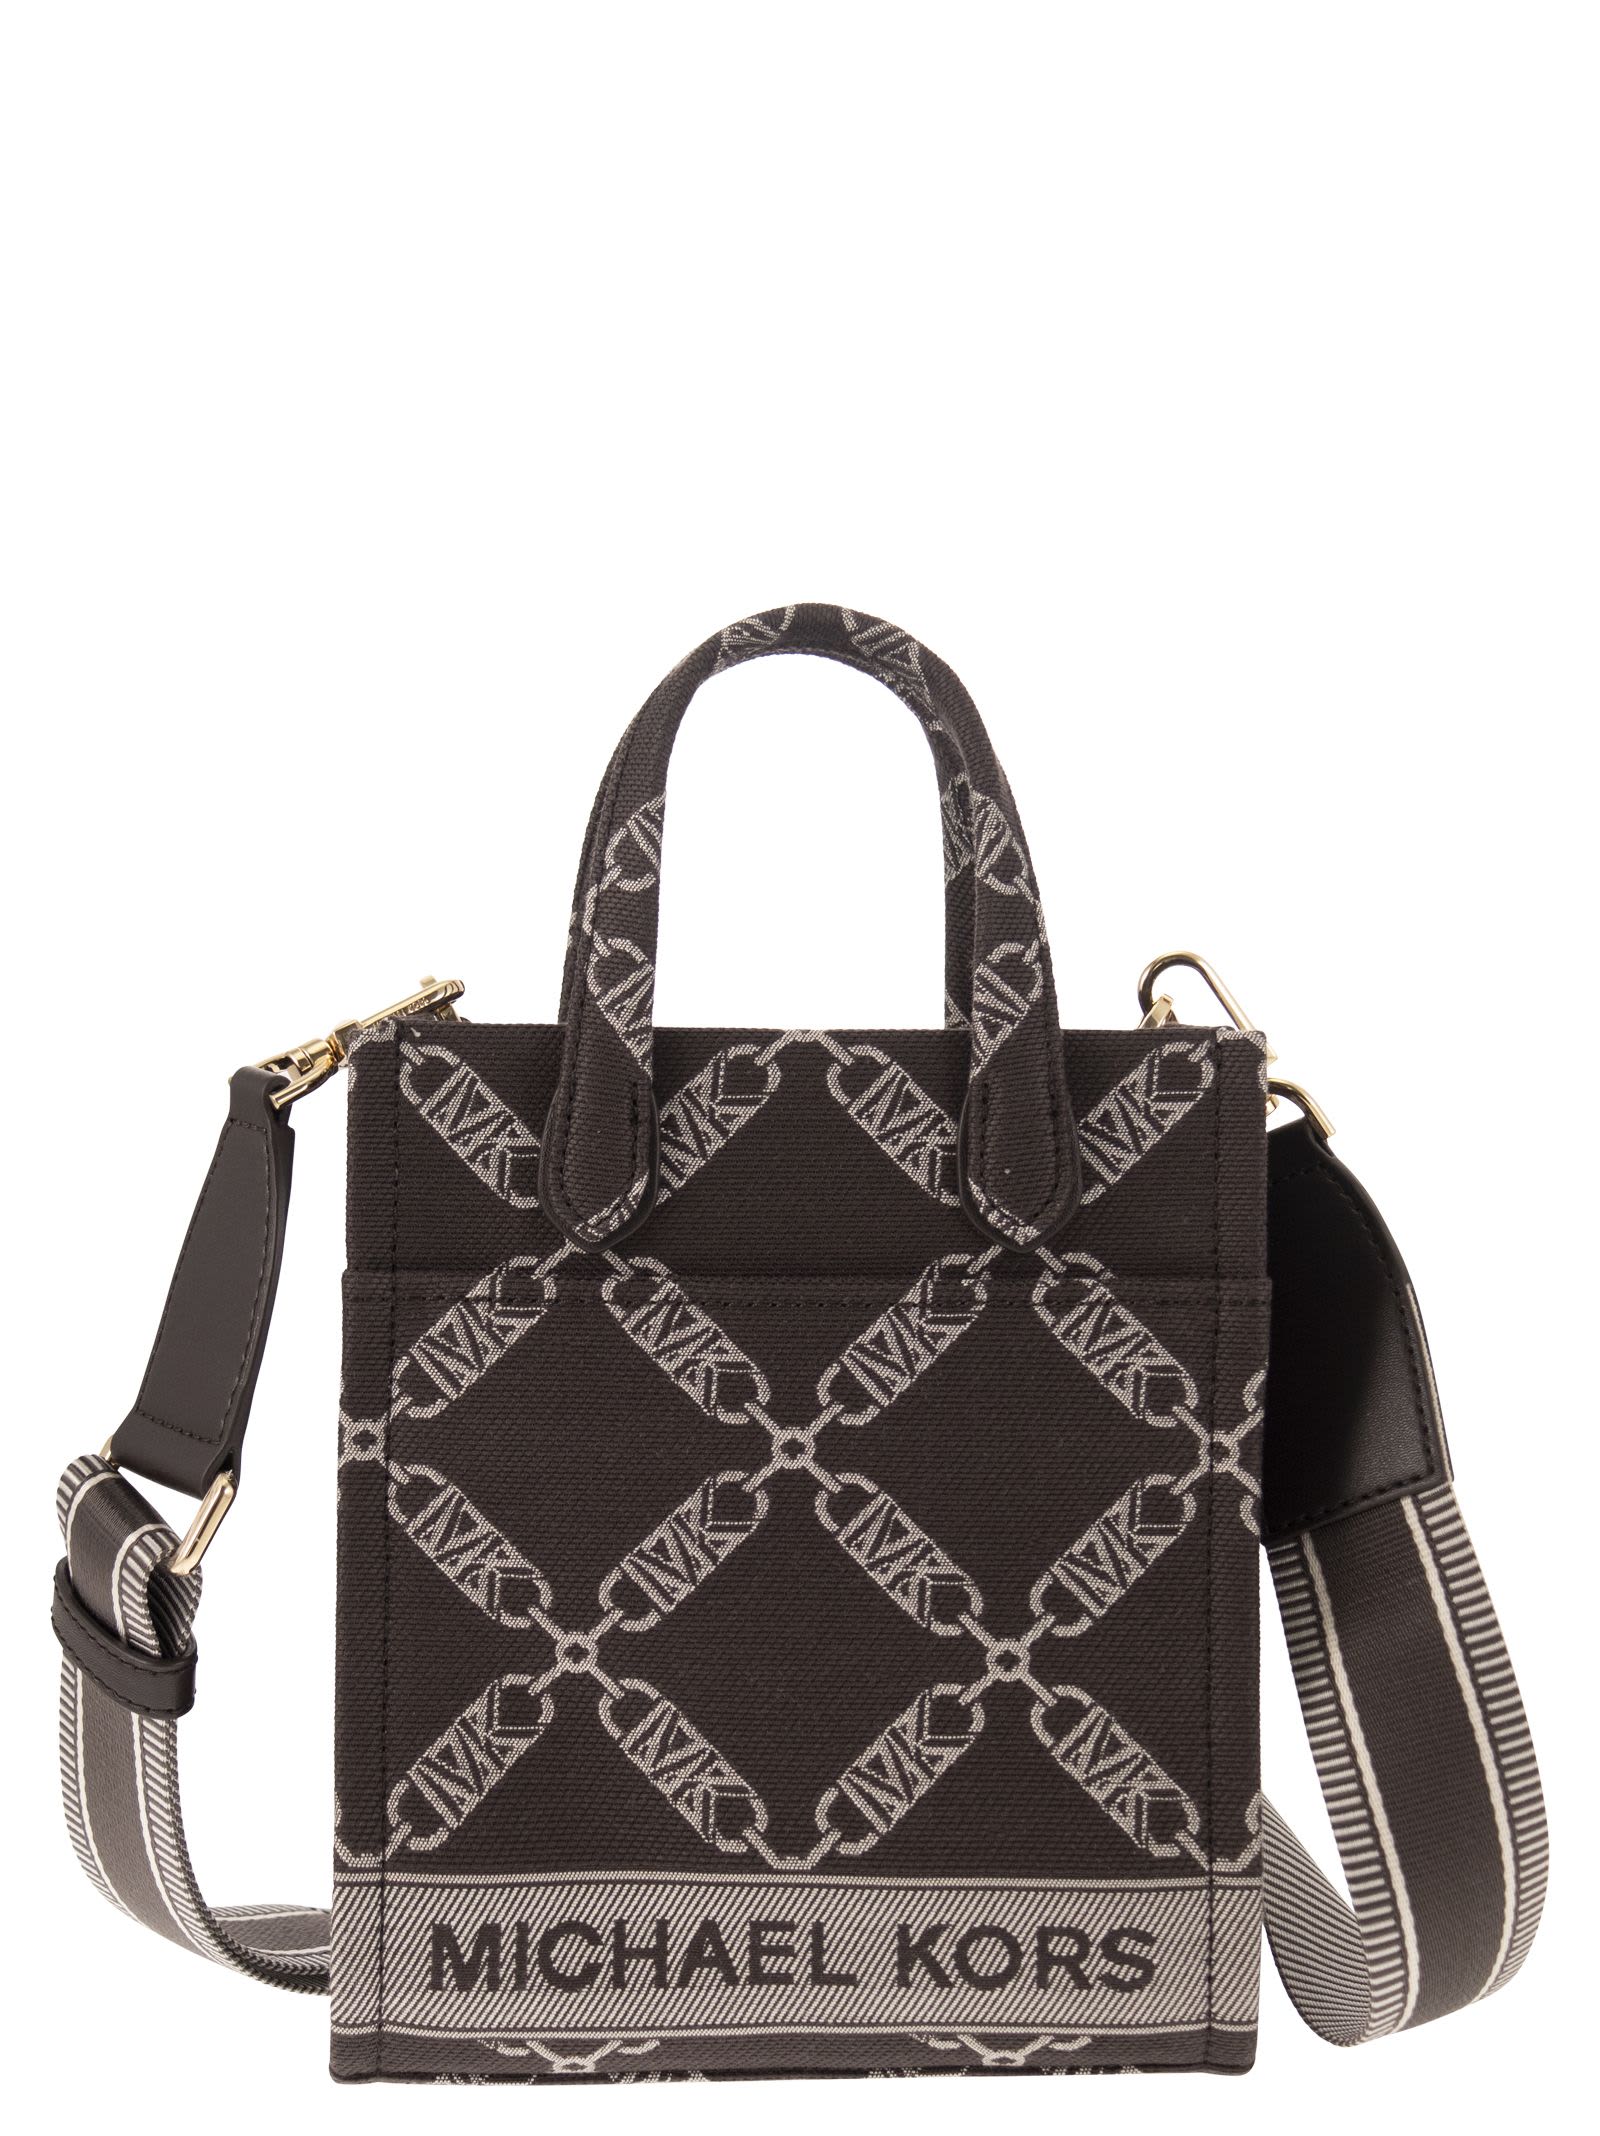 MICHAEL KORS: tote bags for woman - Cocoa